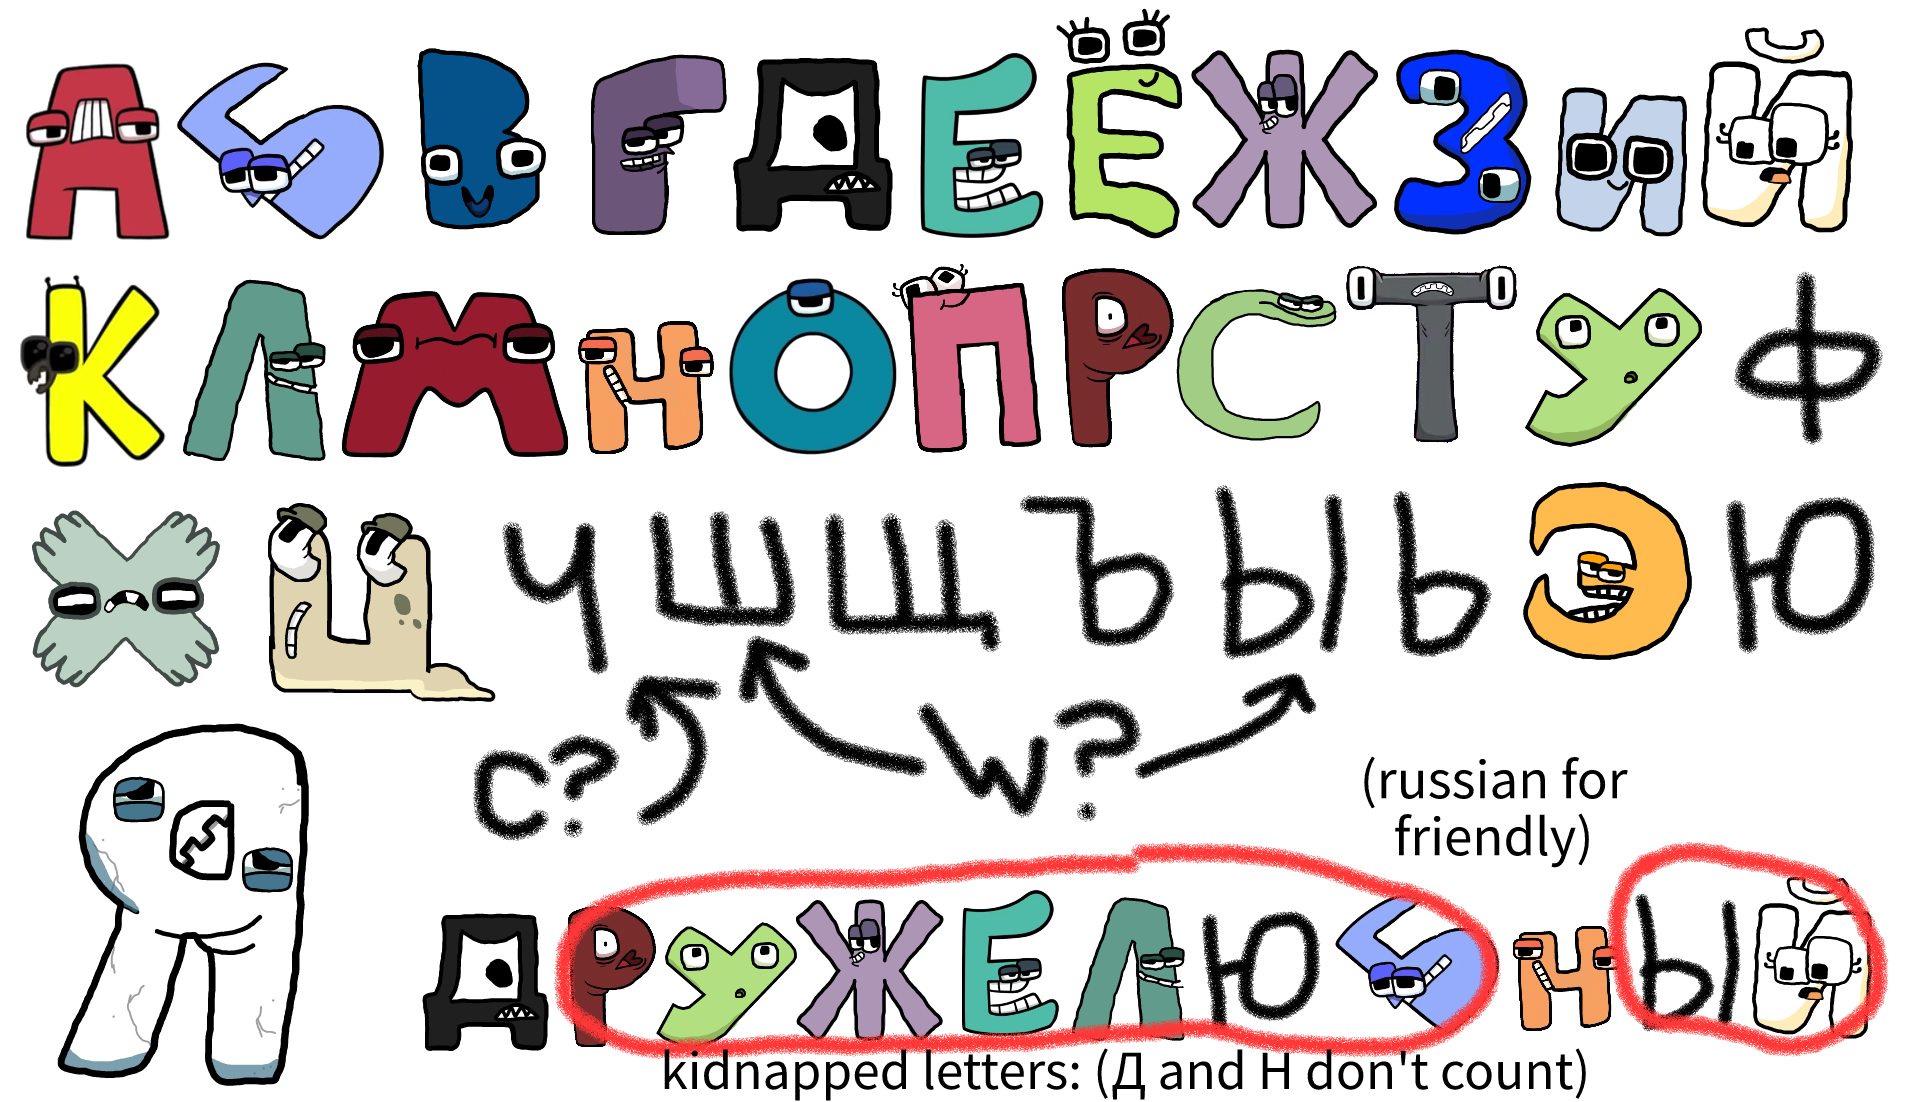 russian alphabet lore by me (wip)